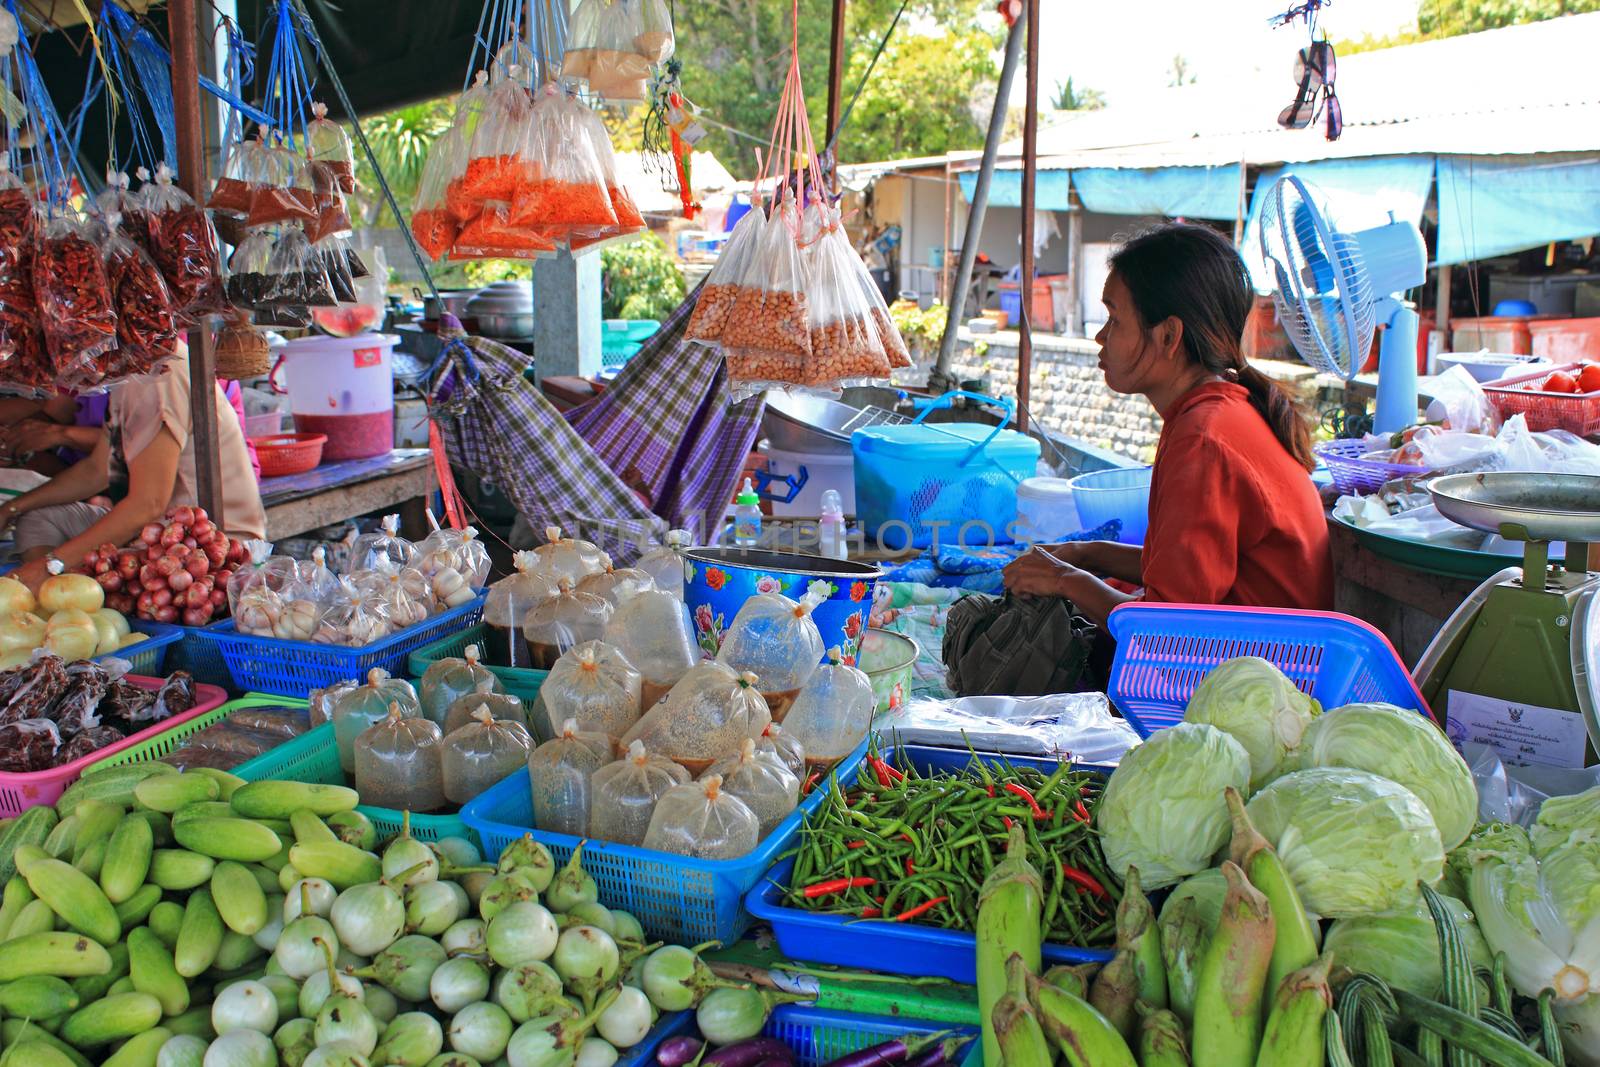 Colorful view to market. For sale are many kinds of vegetables and soups. Seller dressed in red shirt is waiting customers. Lamai beach, Koh Samui, Thailand.